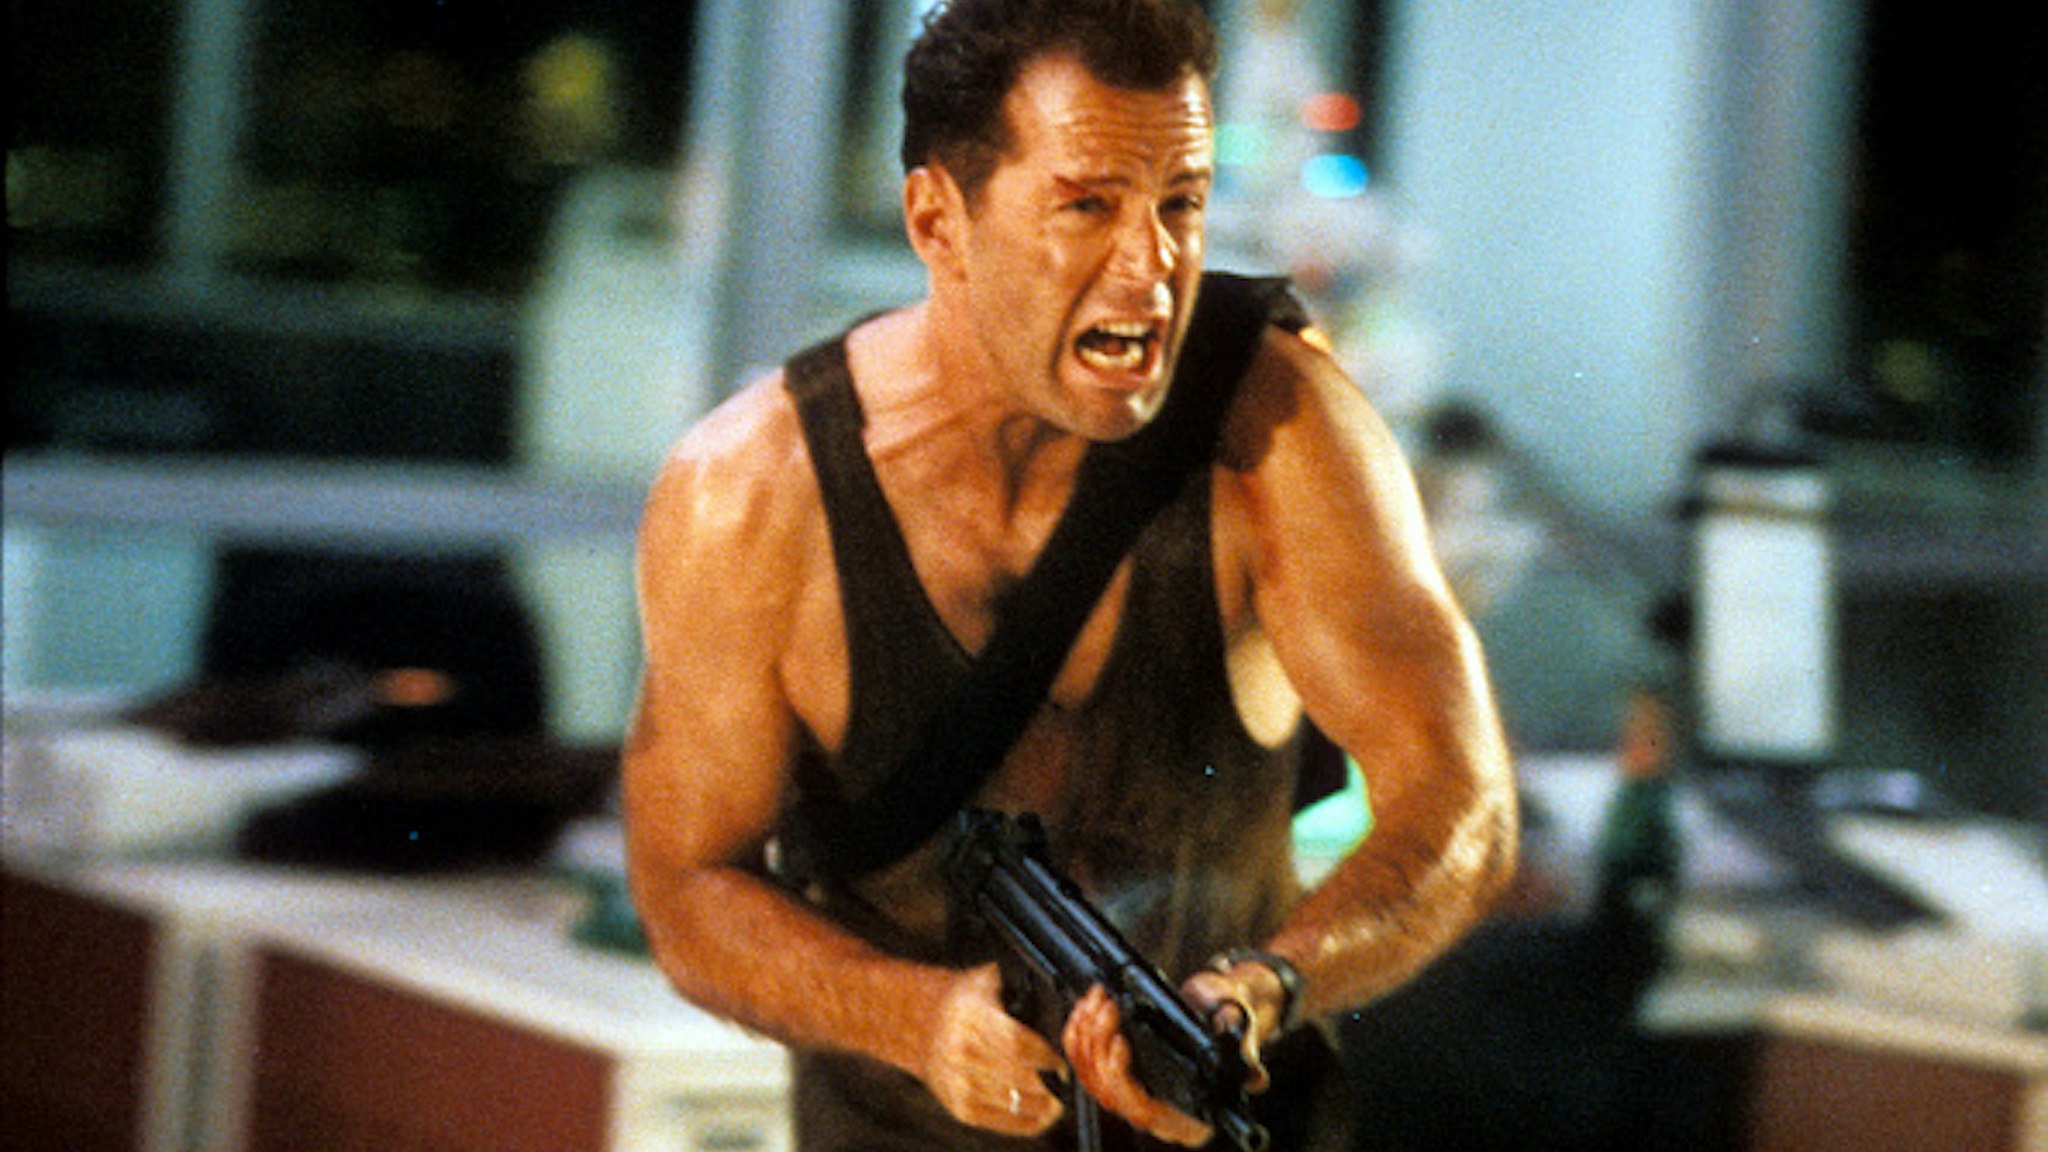 Bruce Willis running with automatic weapon in a scene from the film 'Die Hard', 1988.